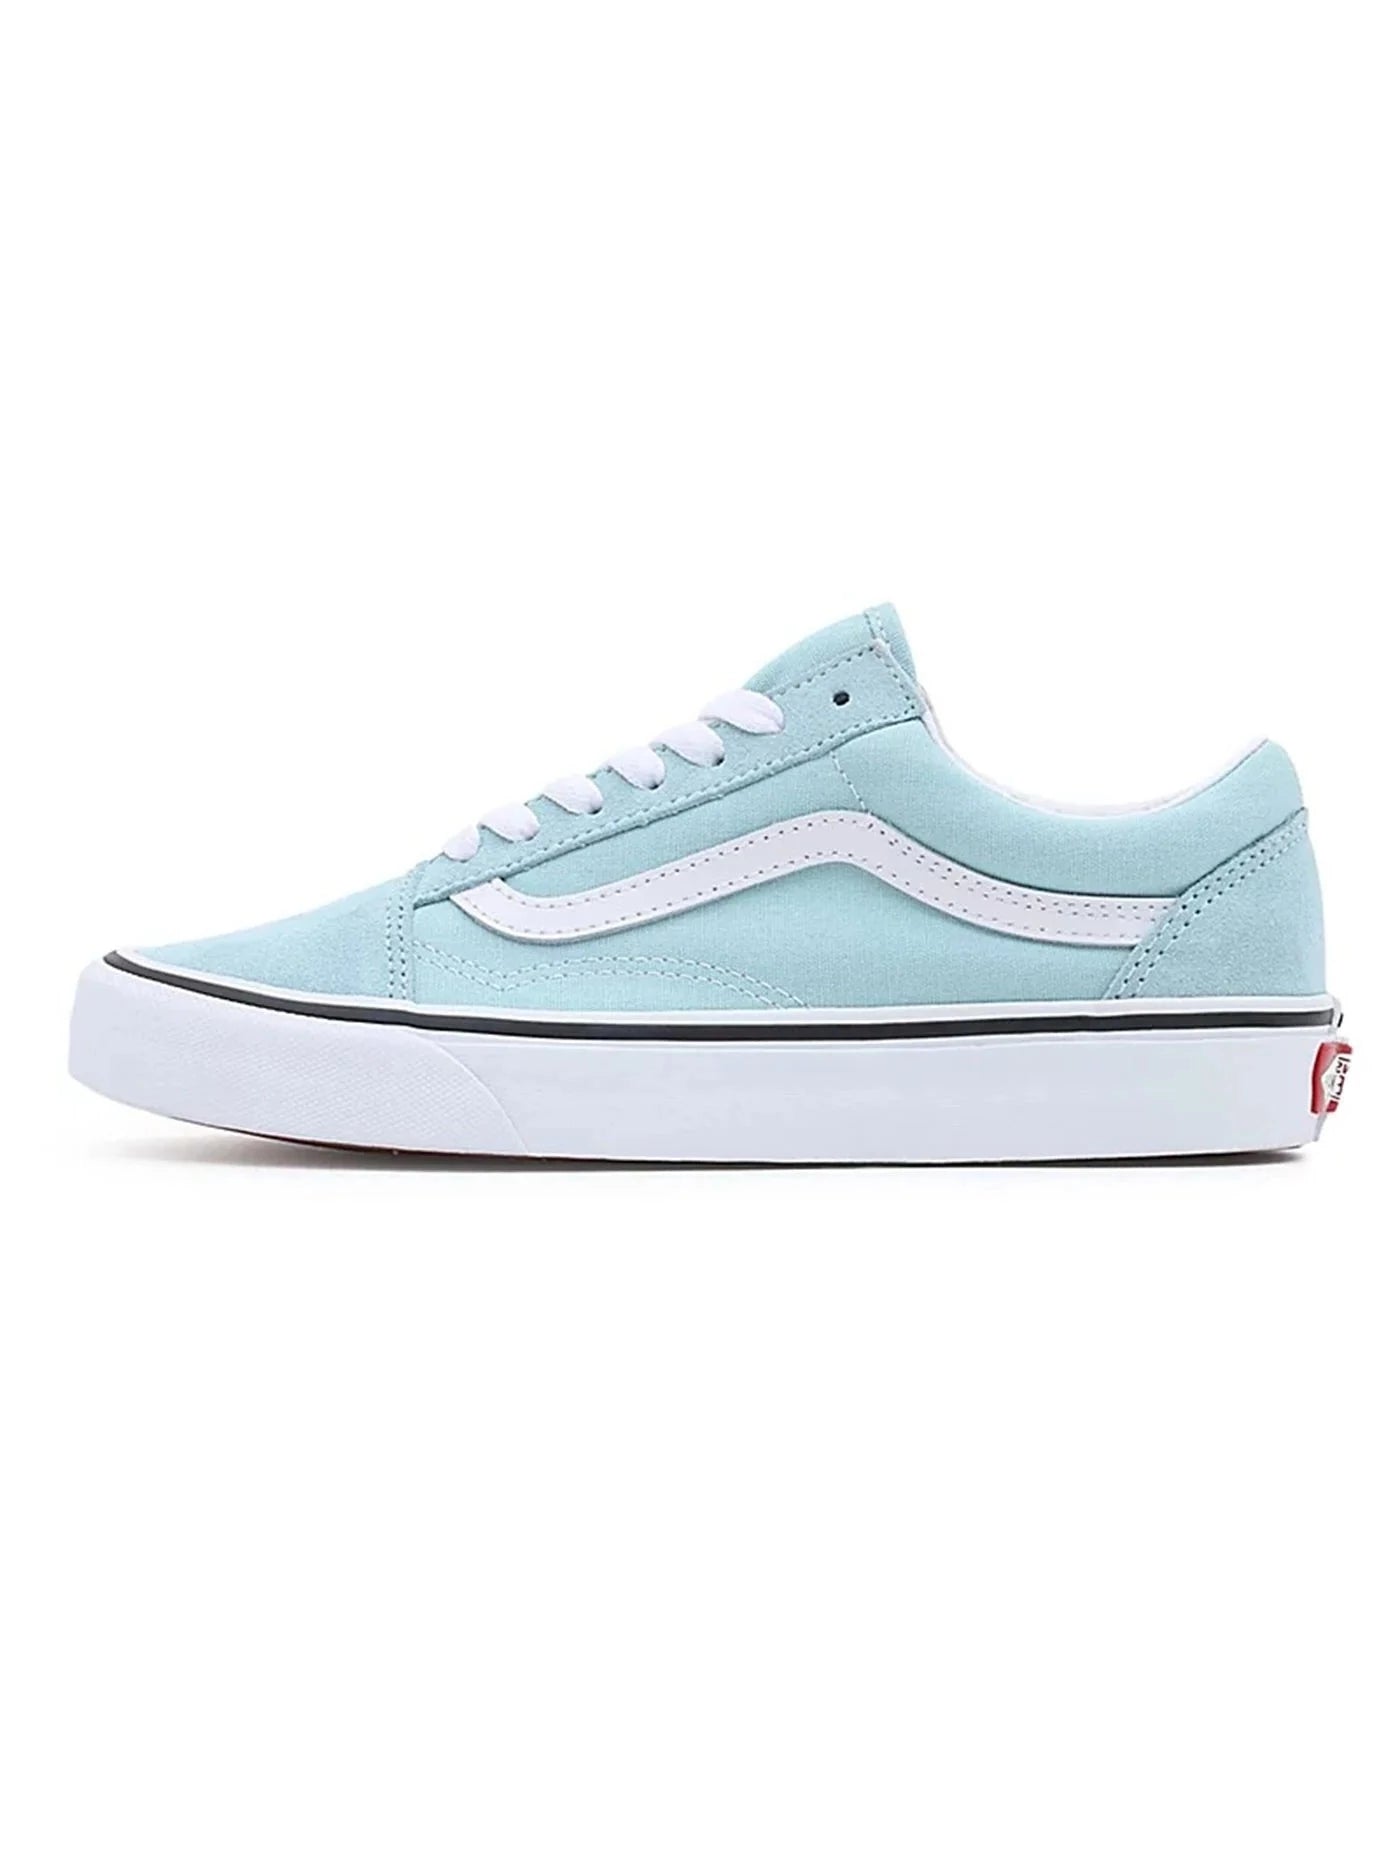 Van's Women's Old Skool-Color Theory Canal Blue